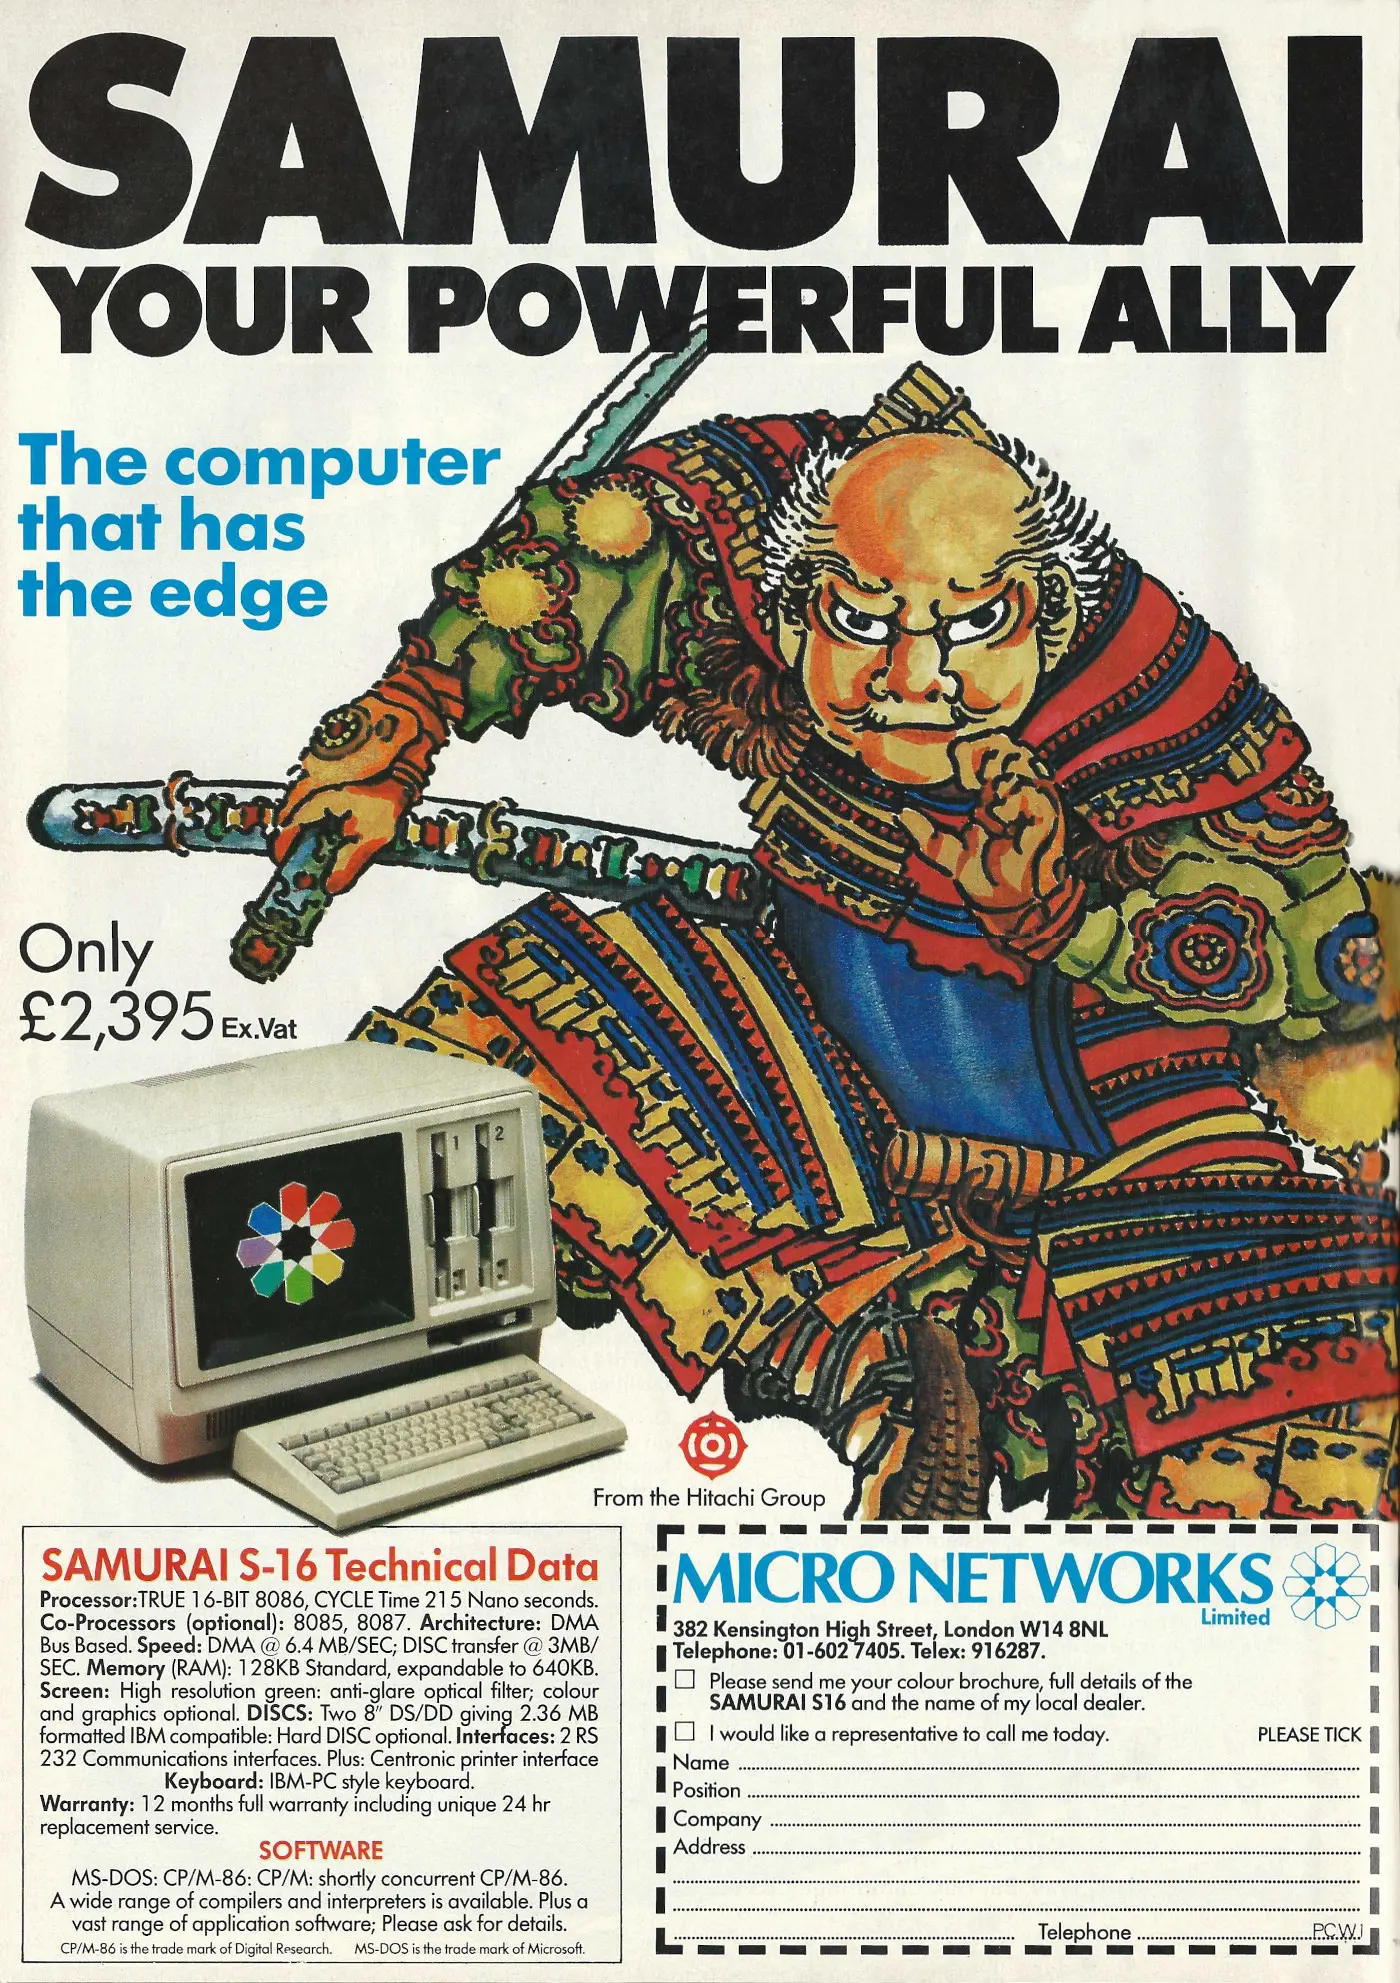 Hitachi Advert: <b>Samurai - your powerful ally</b>, from Personal Computer News, 25th August 1983